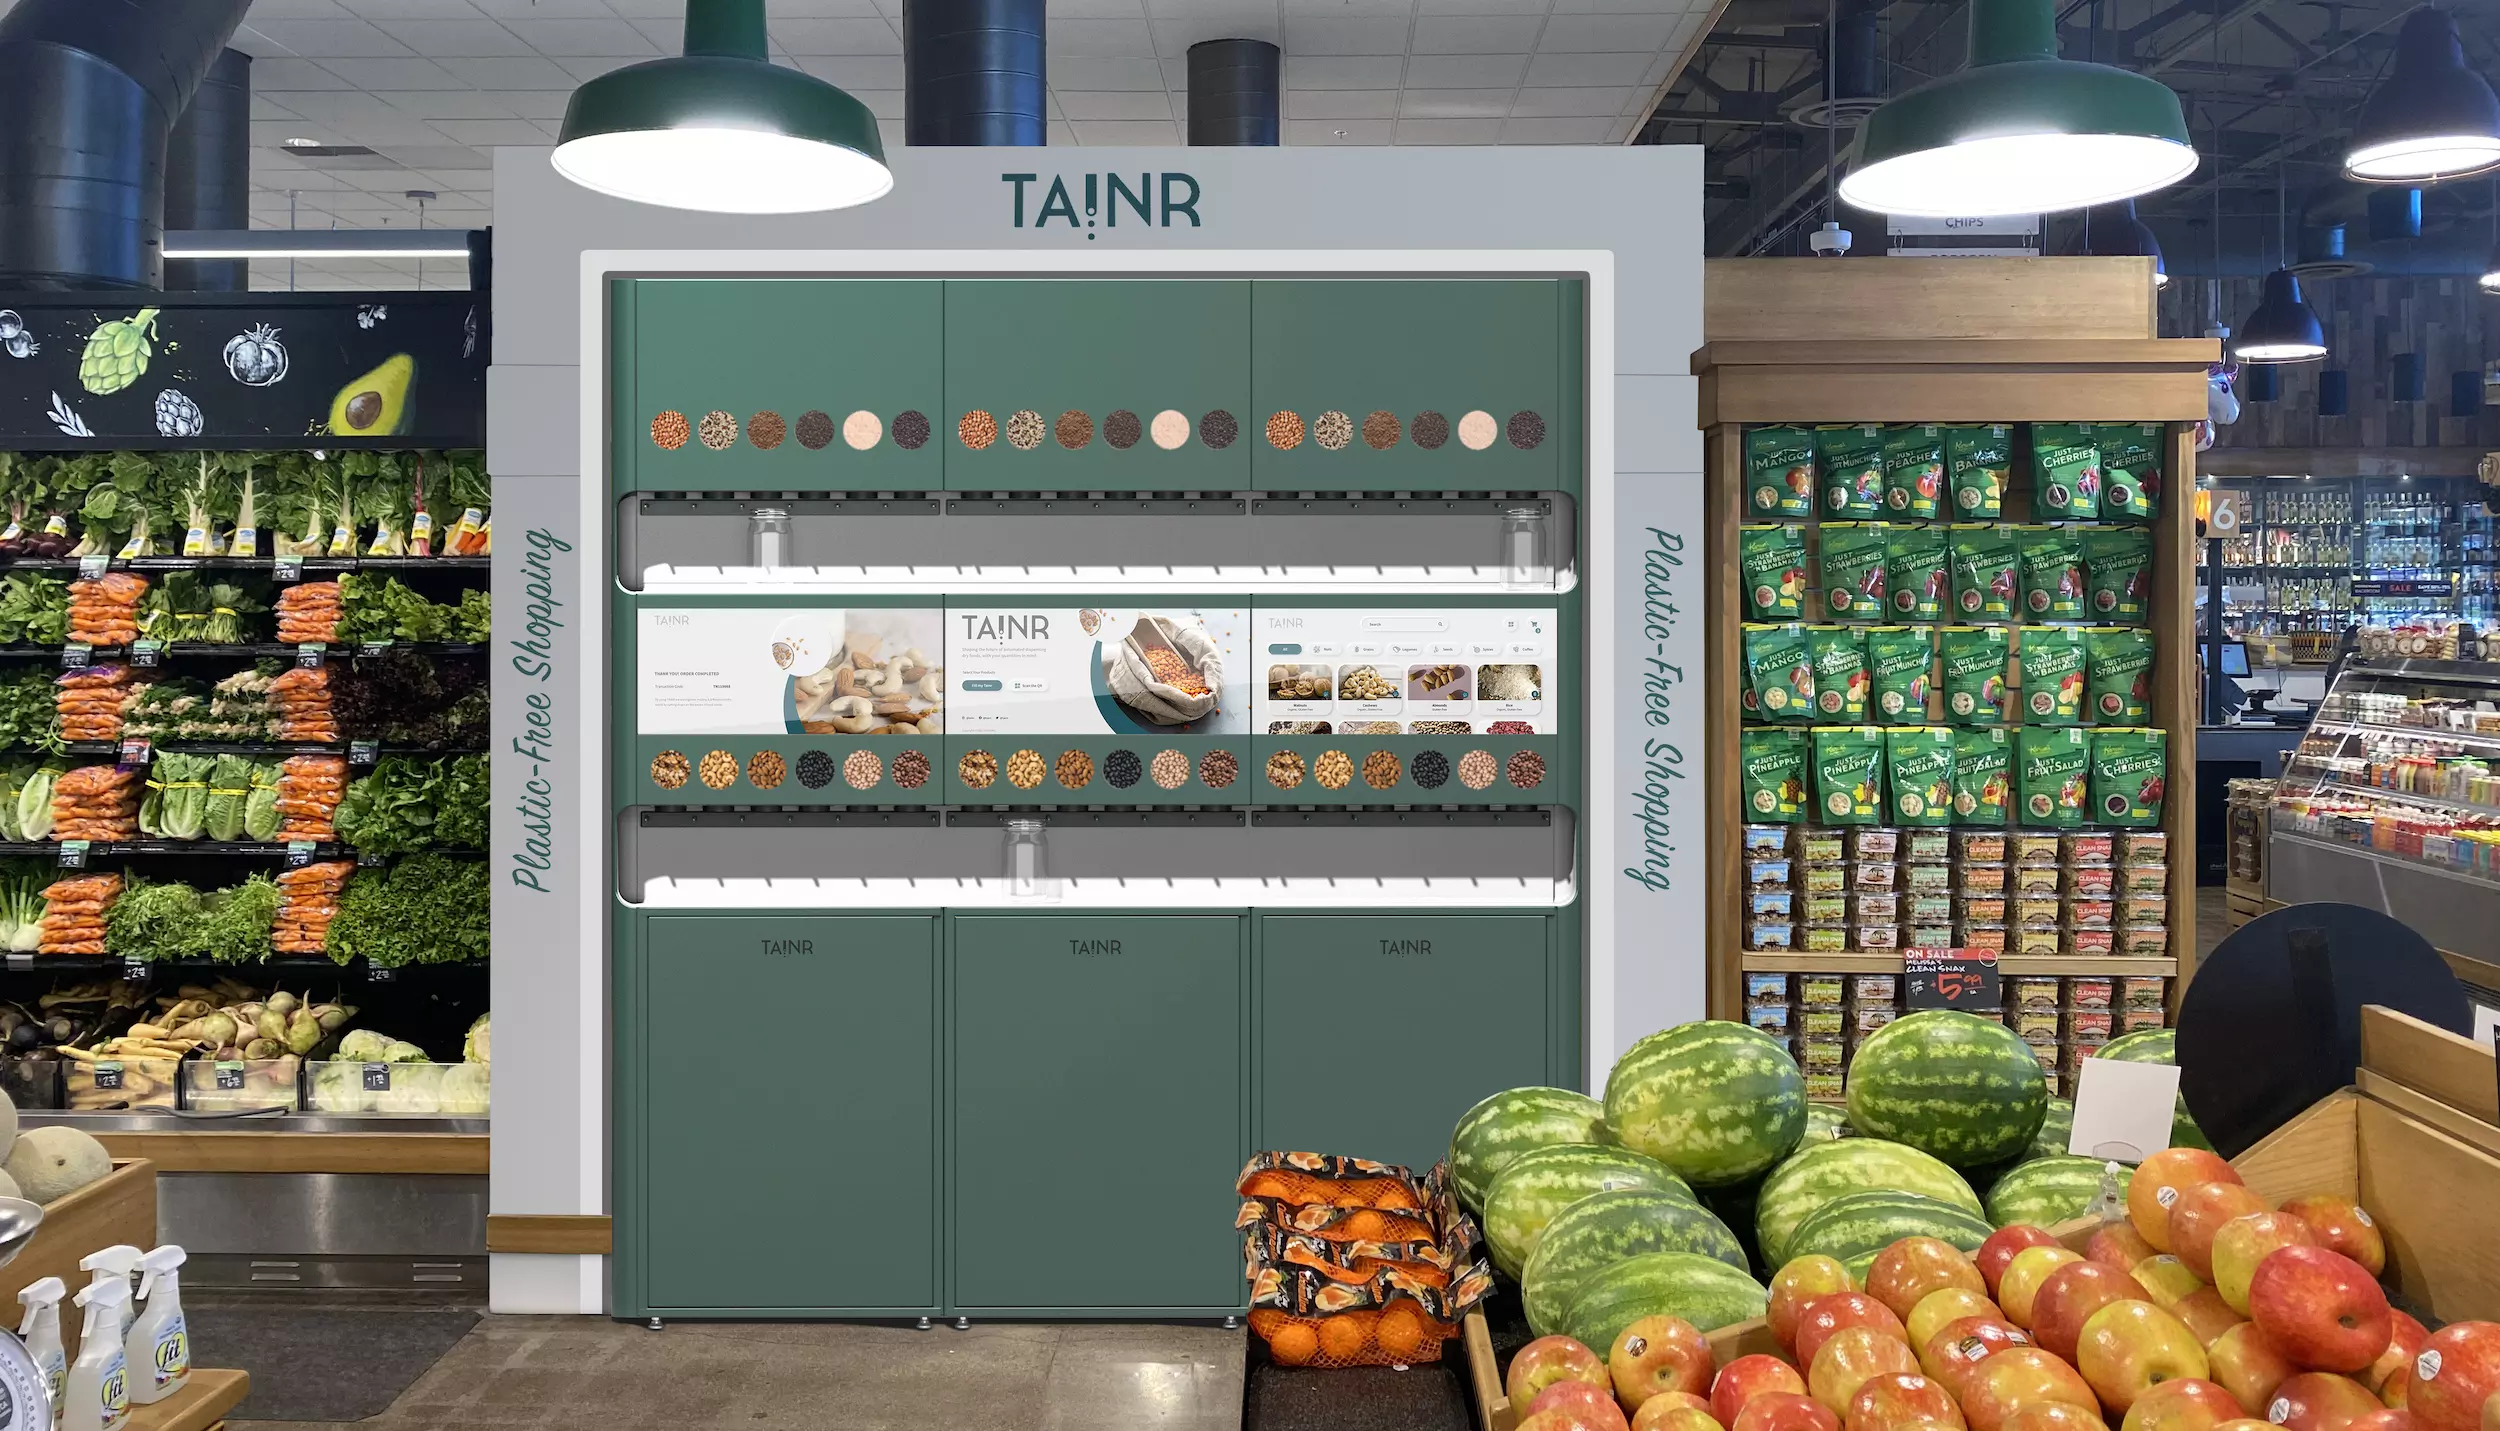 Image of a zero waste shop at the grocery store